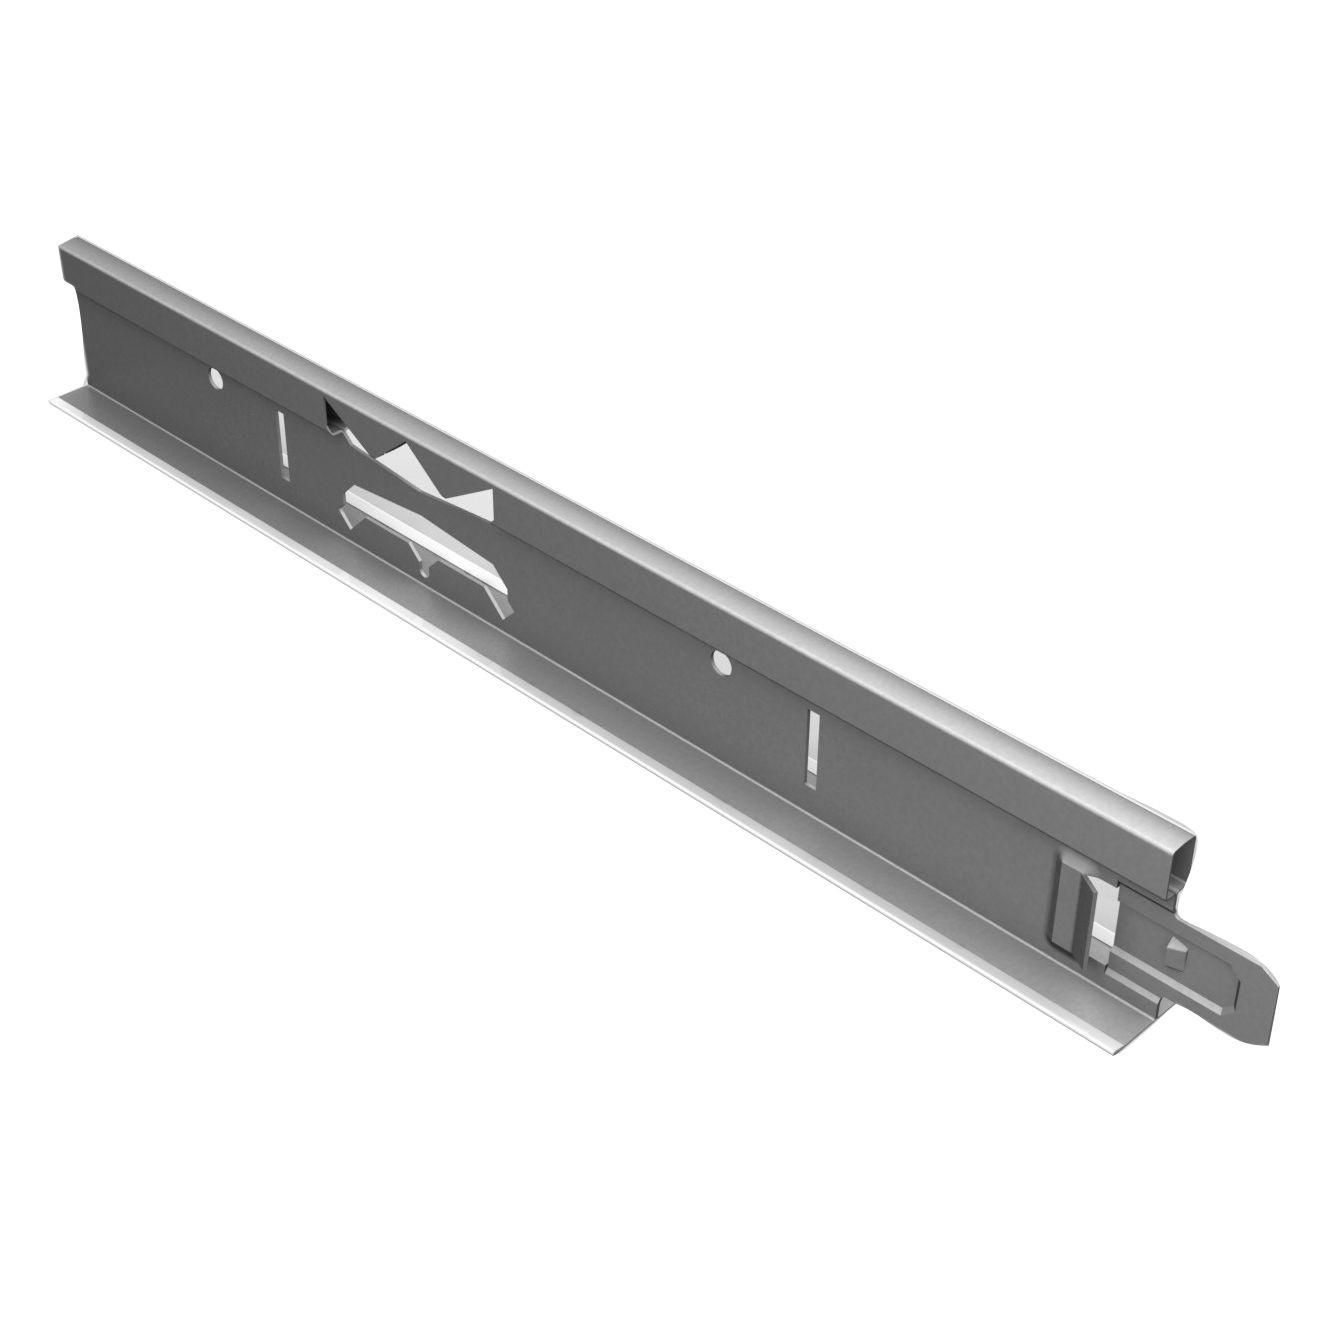 Accessories for cassette ceilings - Main profileWide-screen ceiling Rigips Quick Lock 24 x 3600 mm, https:maxbau.ro